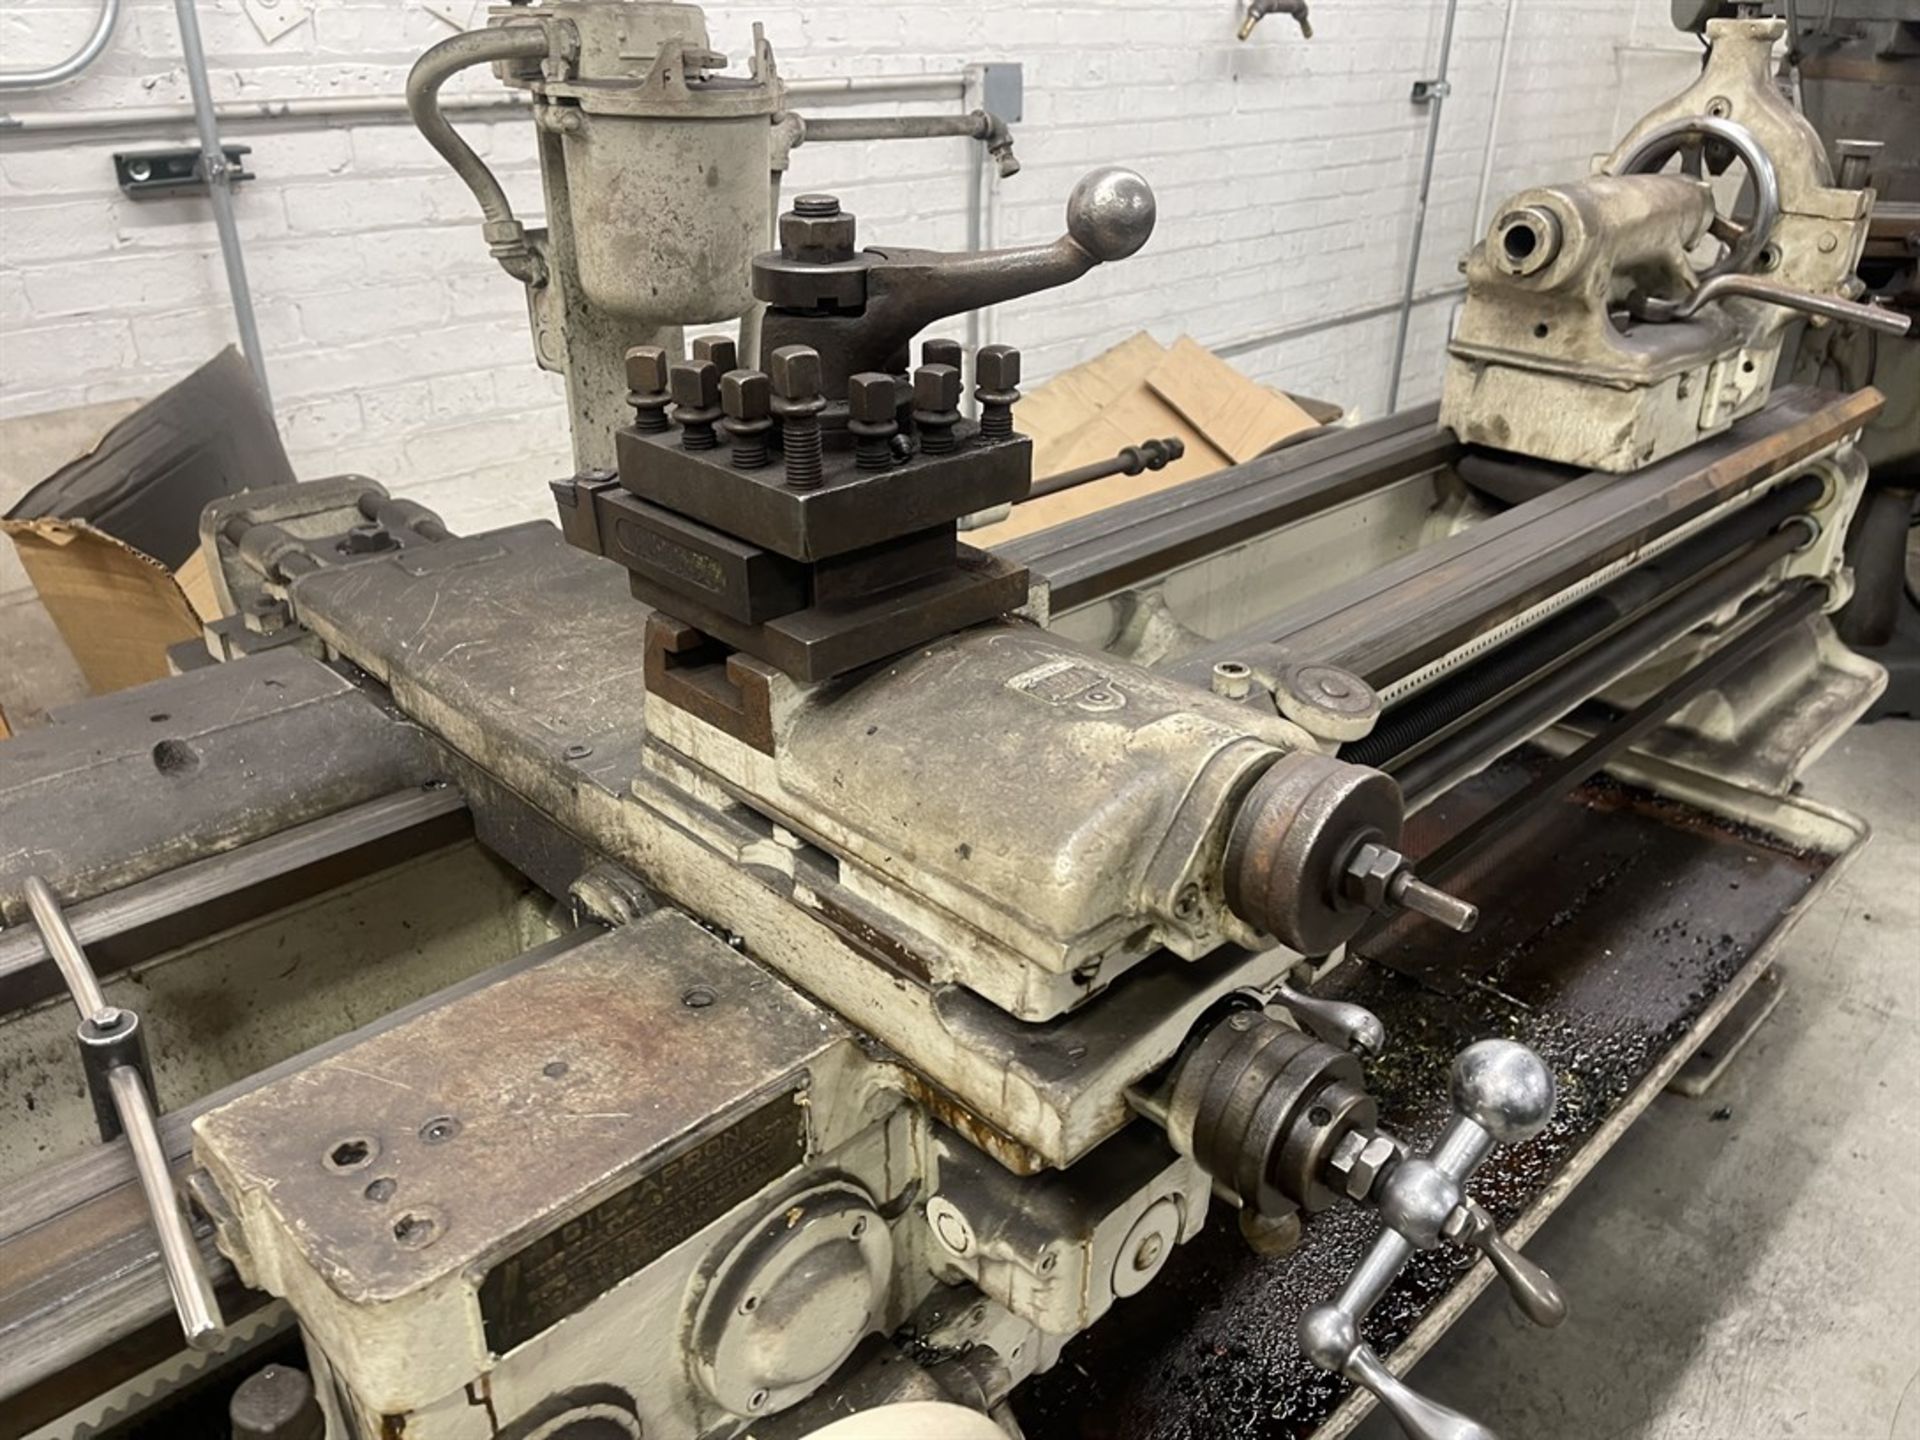 REED-PRENTICE 18" X 80" Engine Lathe w/ Tapper Attachment, s/n 14318 - Image 3 of 5